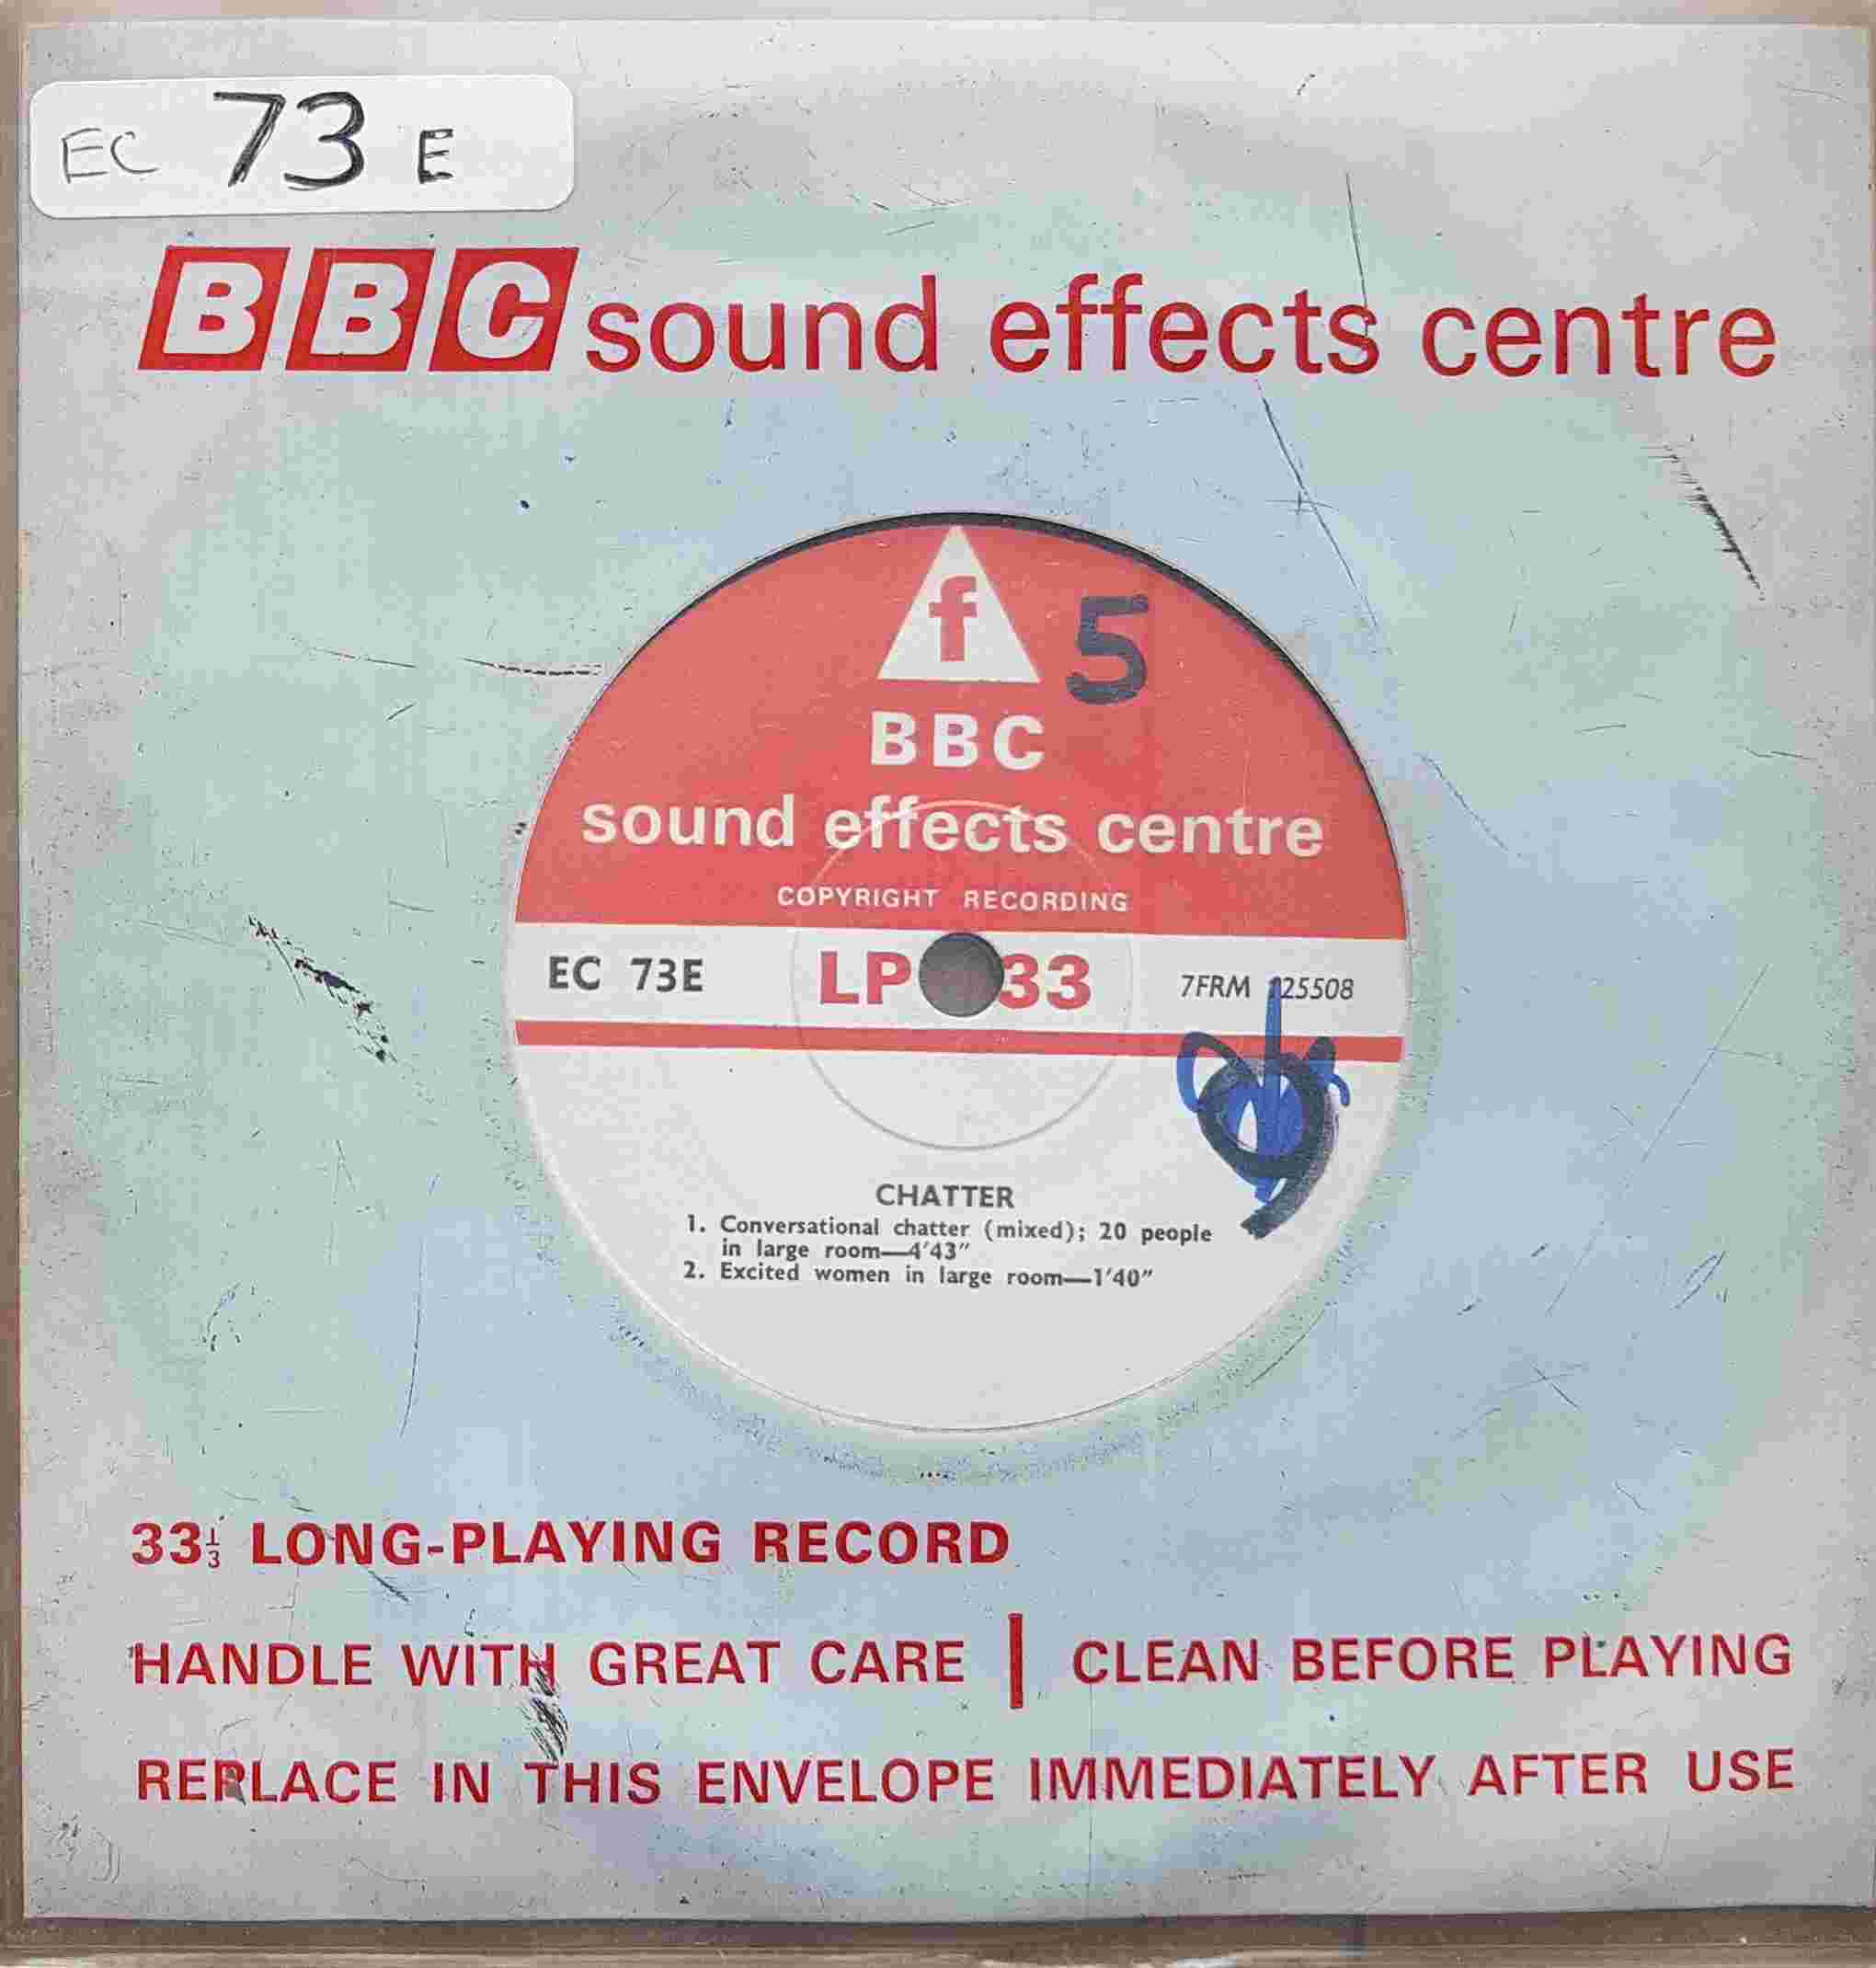 Picture of EC 73E Chatter by artist Not registered from the BBC singles - Records and Tapes library